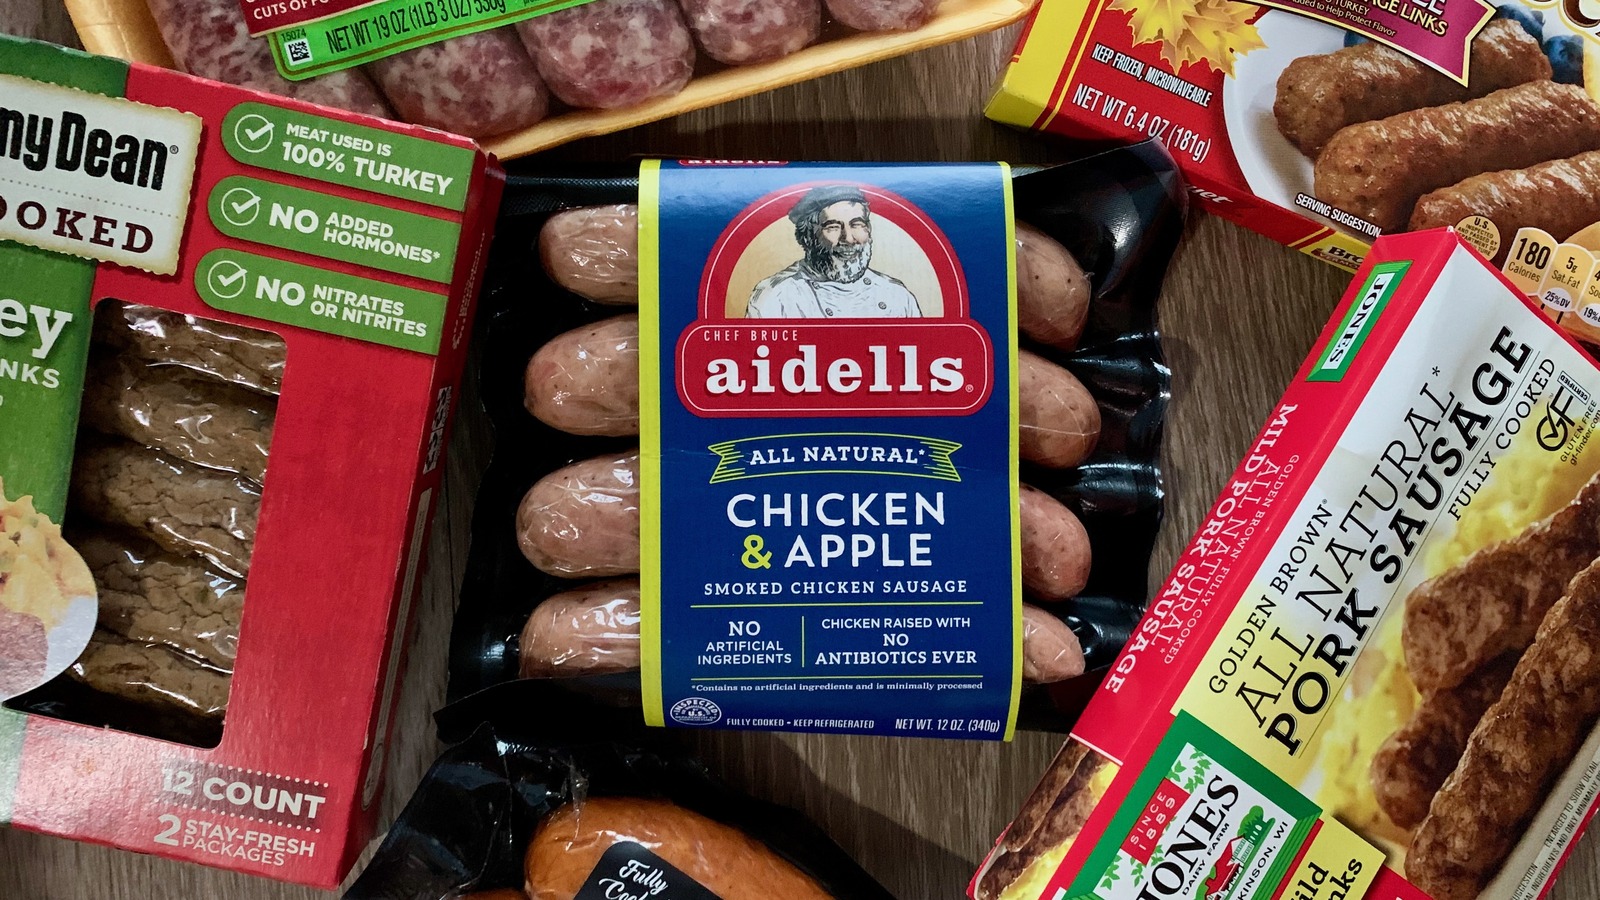 https://www.tastingtable.com/img/gallery/12-popular-store-bought-sausage-brands-ranked/l-intro-1679509792.jpg